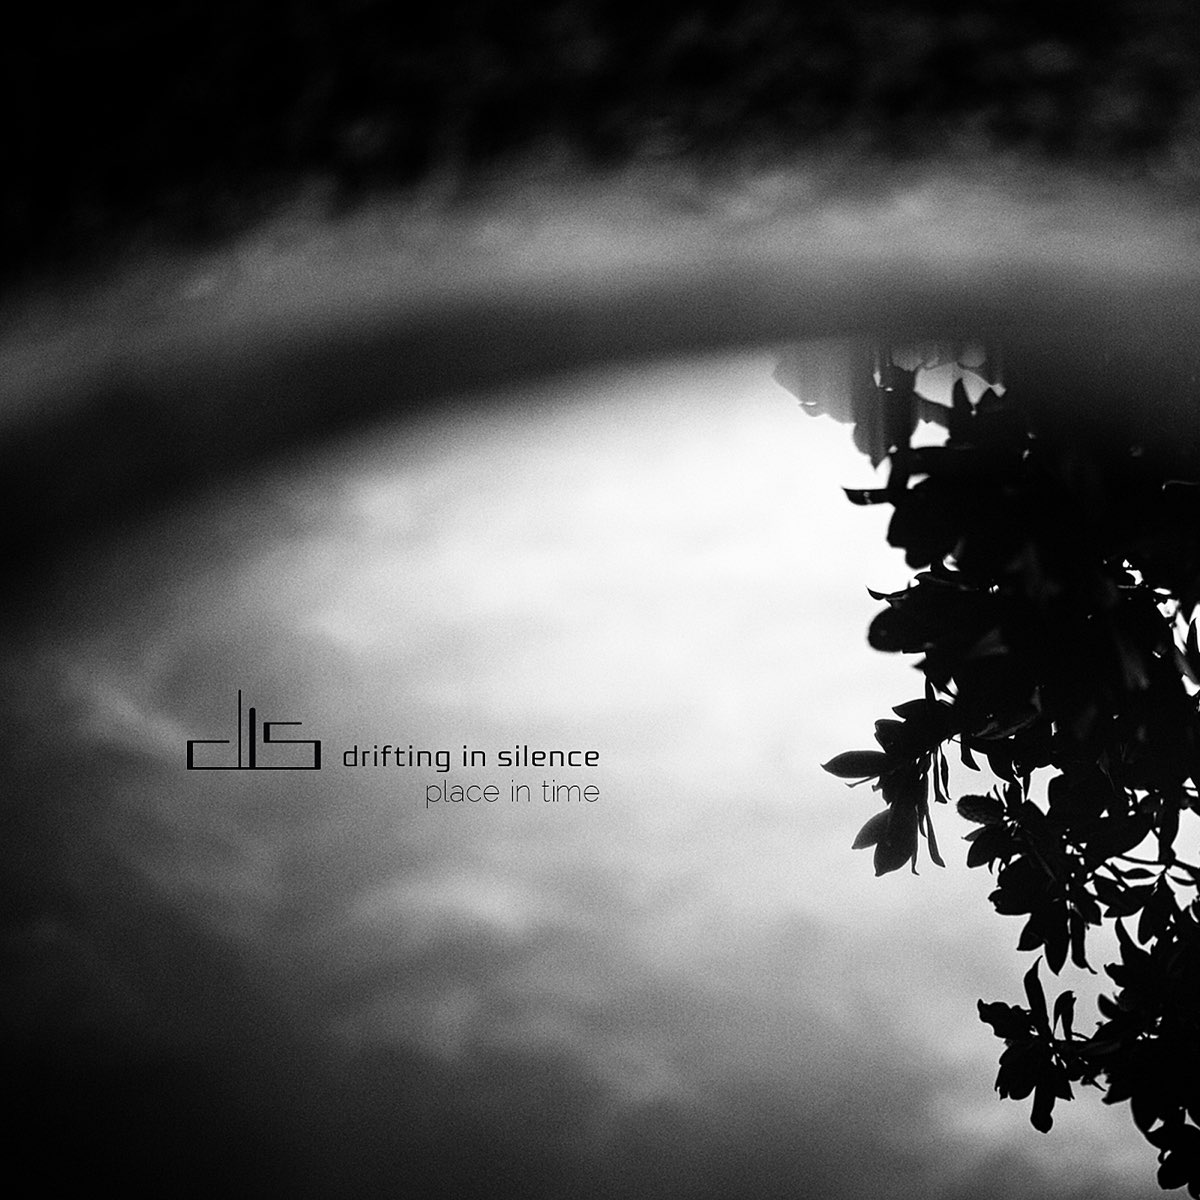 Drifting time. Негр in Silence. Silent place. The caretaker - Drifting time misplaced.